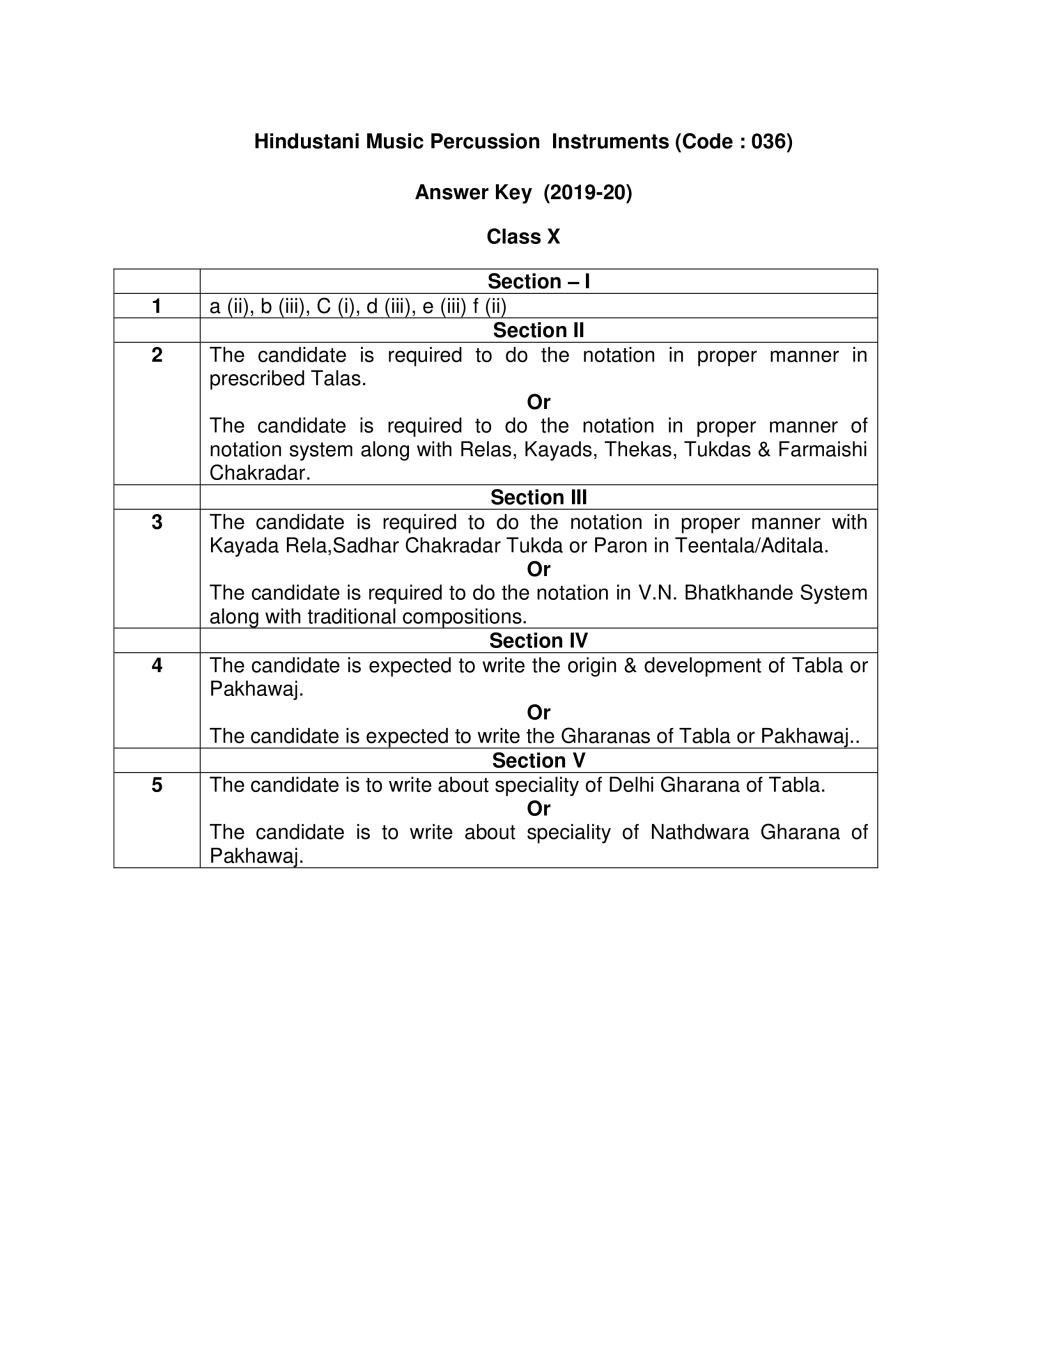 CBSE Class 10 Marking Scheme 2020 for Hindustandi Percussion - Page 1